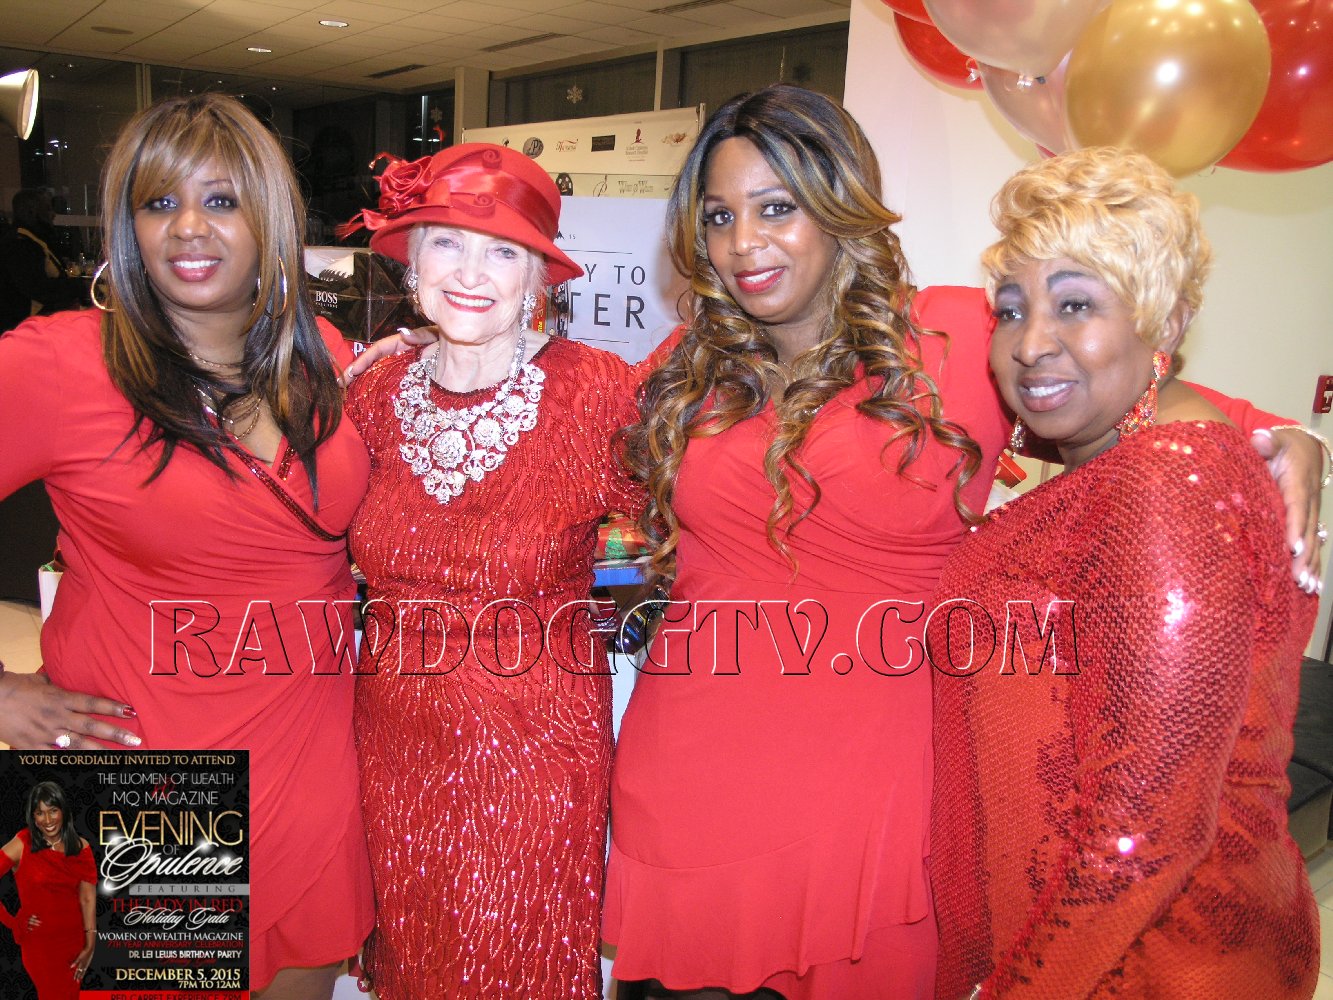 Women of Wealth Magazine Photos-St. Jude Childrens Research Hospital Toy Drive Image- Global Press Dist RAWDOGGTV 305-490-2182 (12)